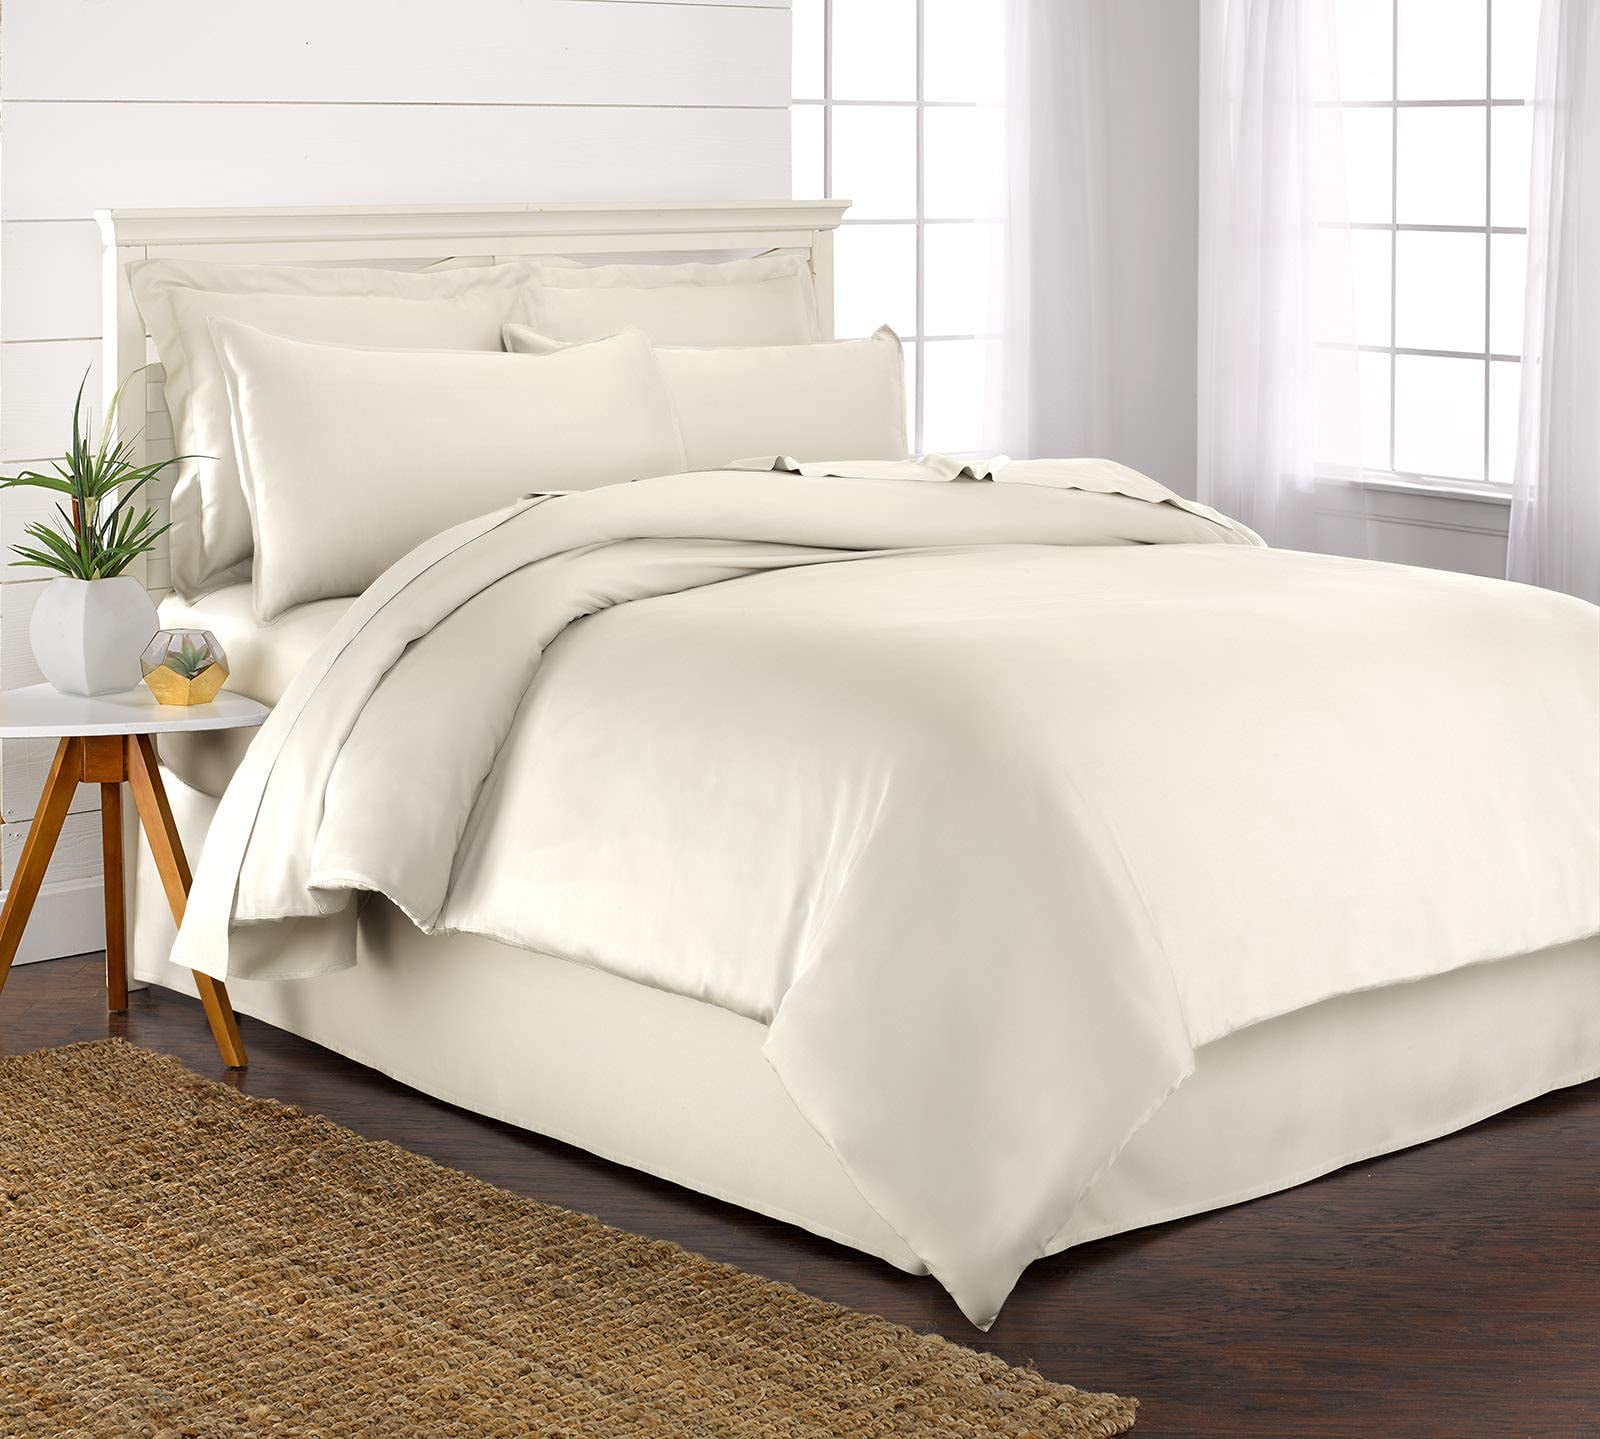 Pure Bamboo Duvet Cover Set Twin Size, White Bamboo Duvet Cover